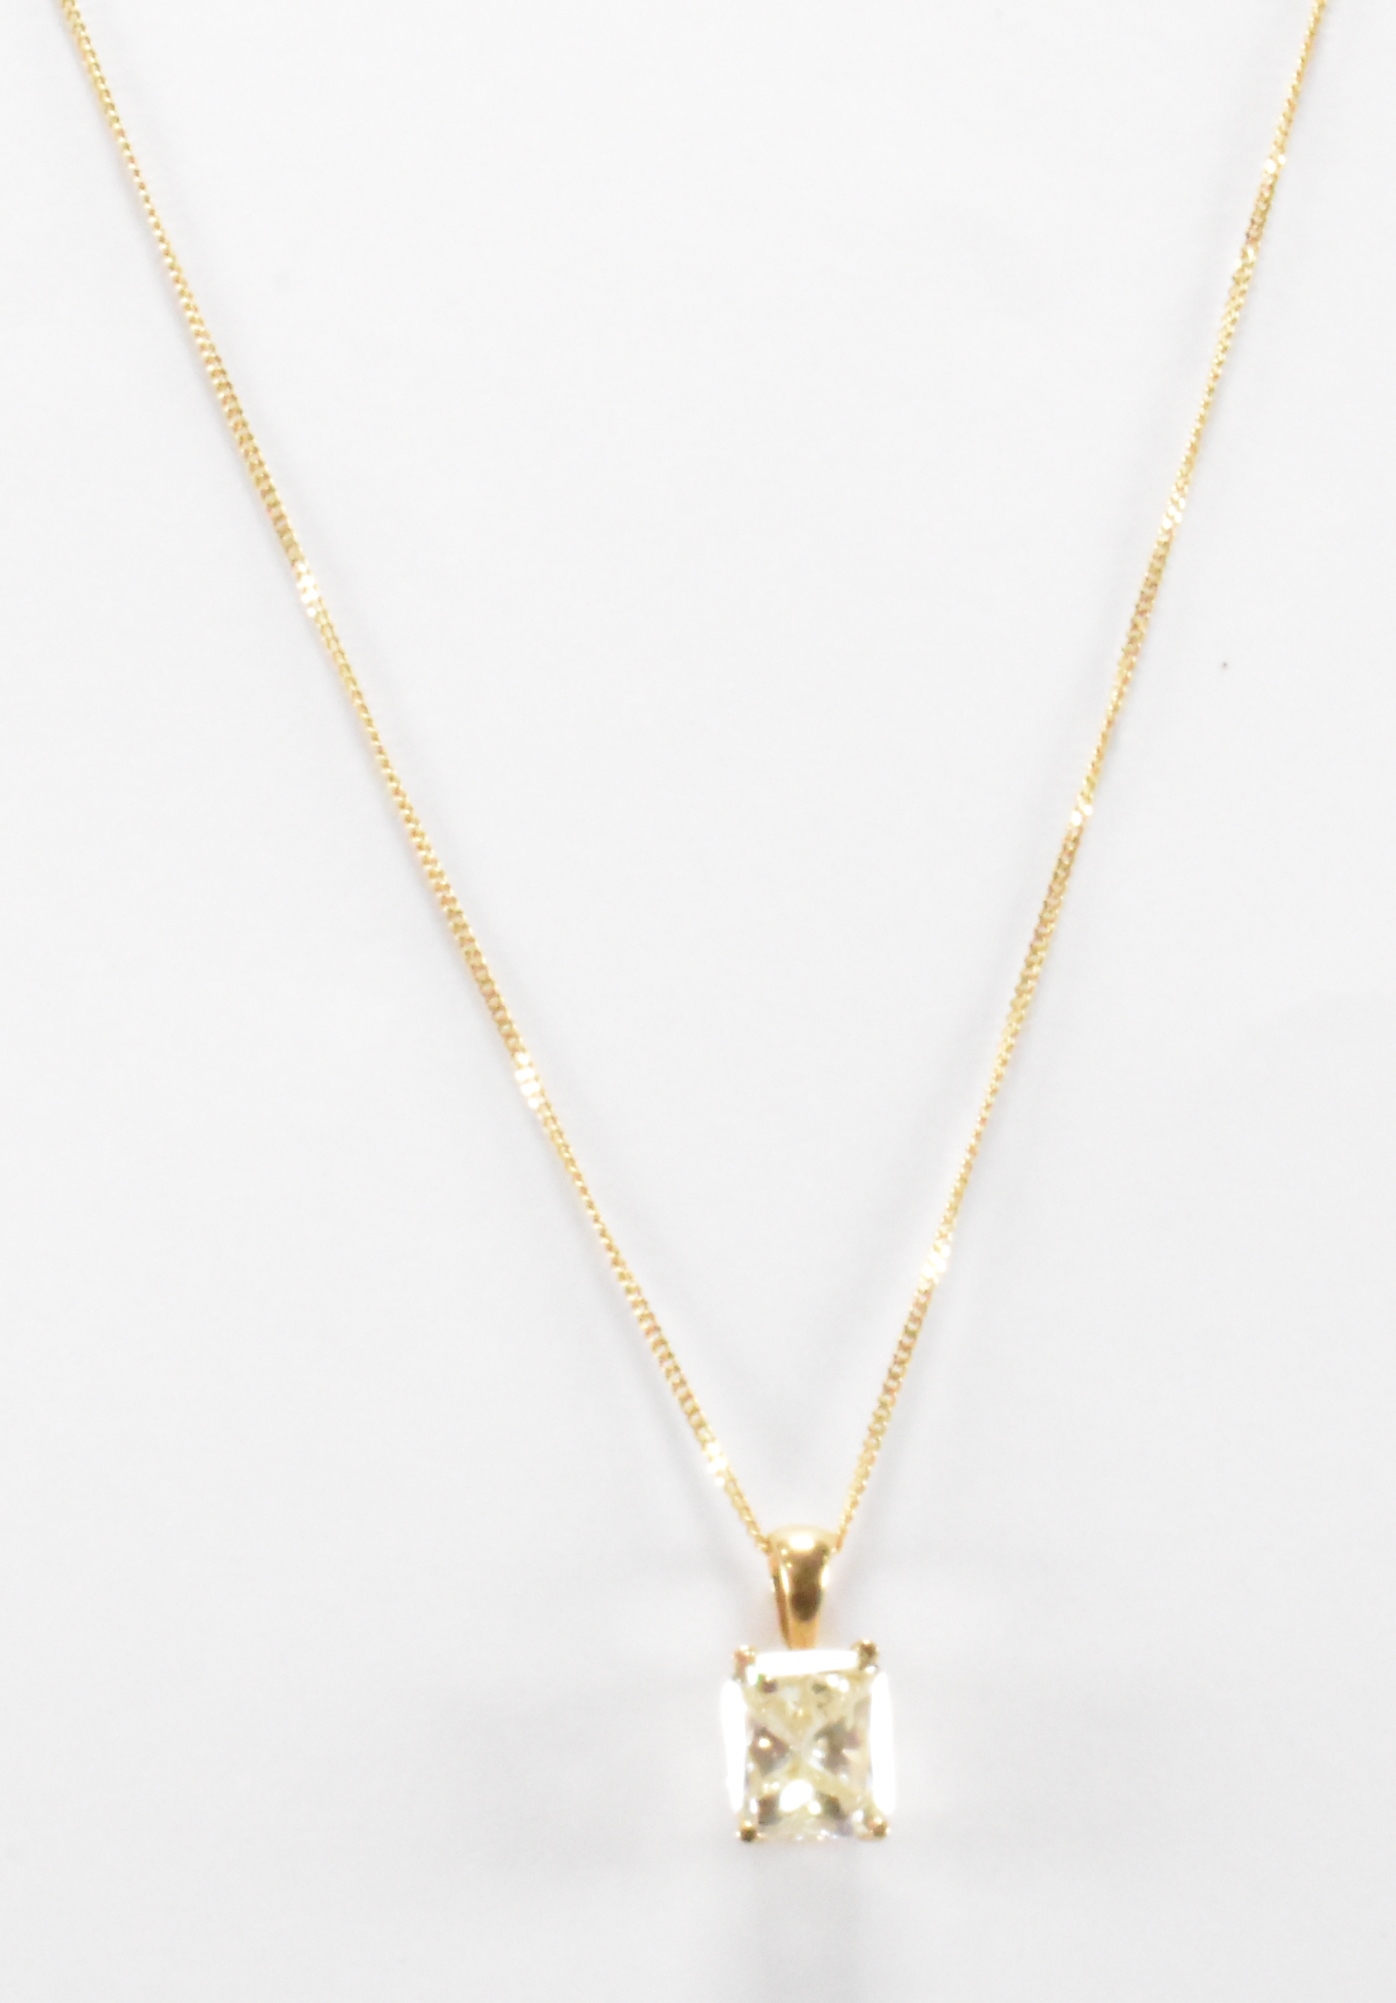 18CT GOLD & DIAMOND PENDANT NECKLACE & GOLD CHAIN - Image 2 of 8